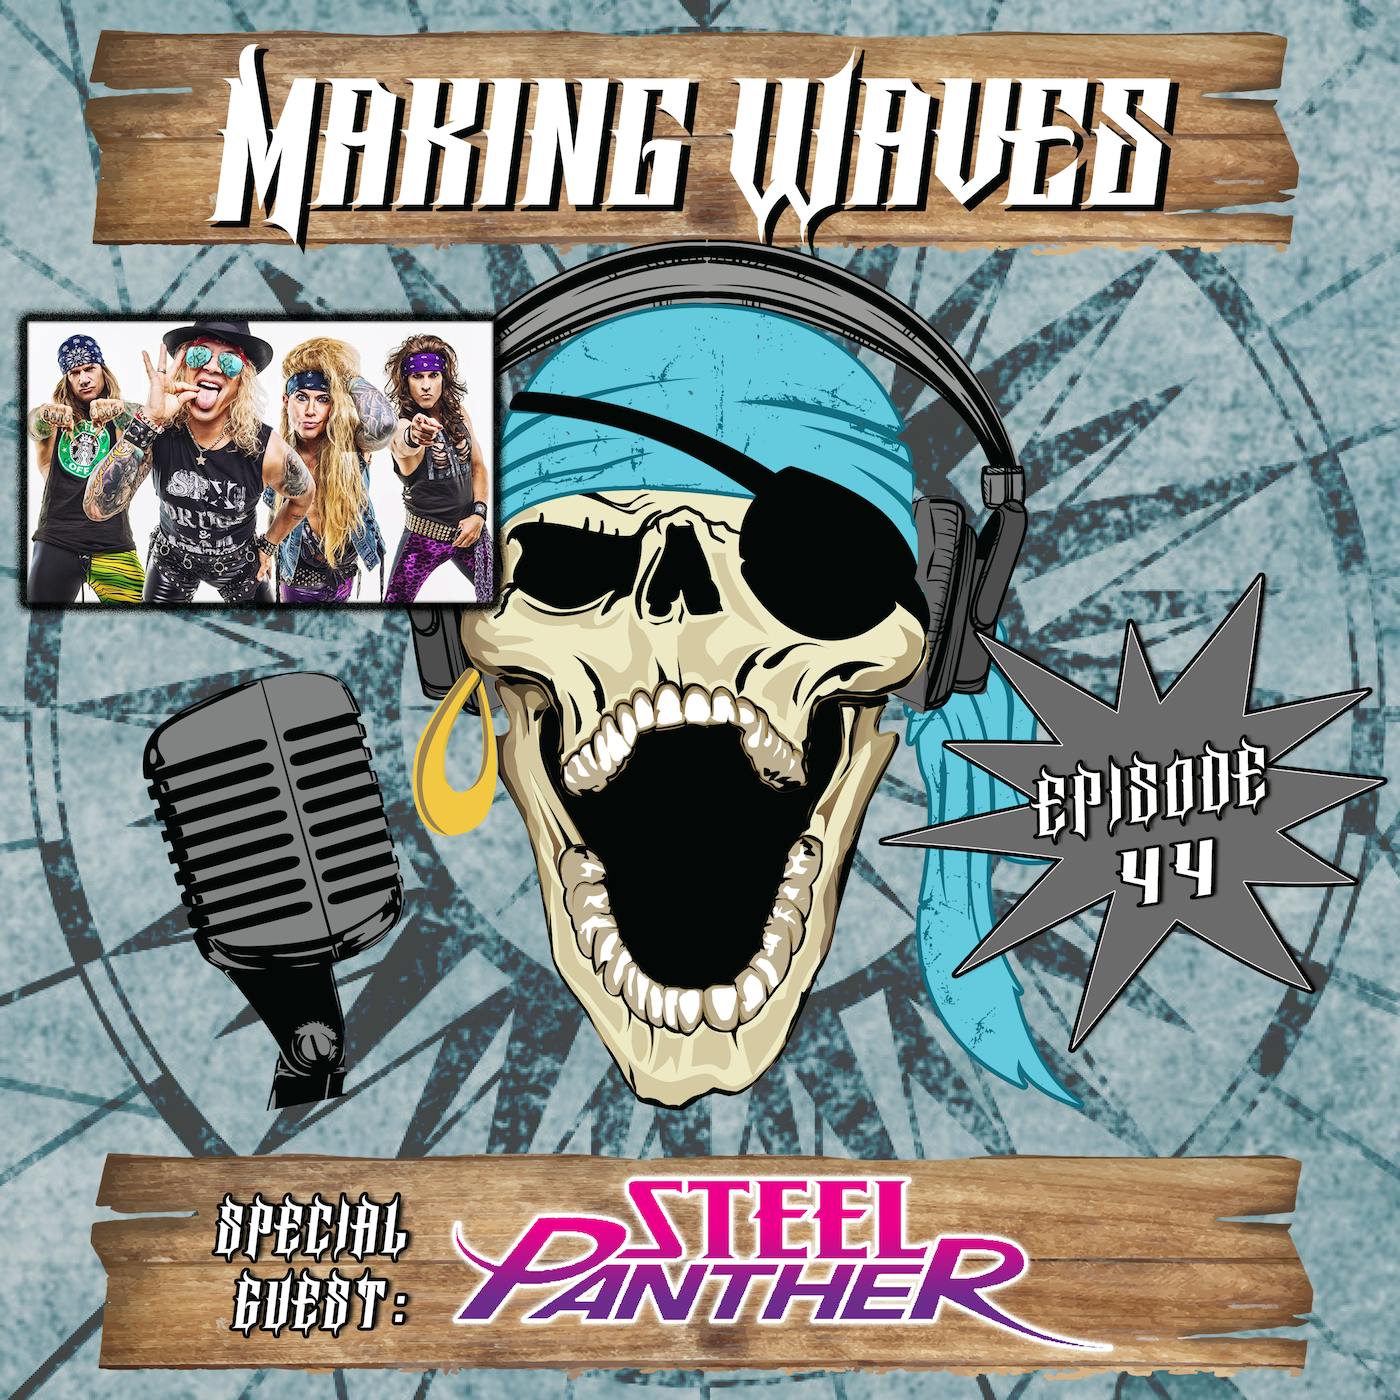 Making Waves and Babies with Michael and Lexxi of Steel Panther